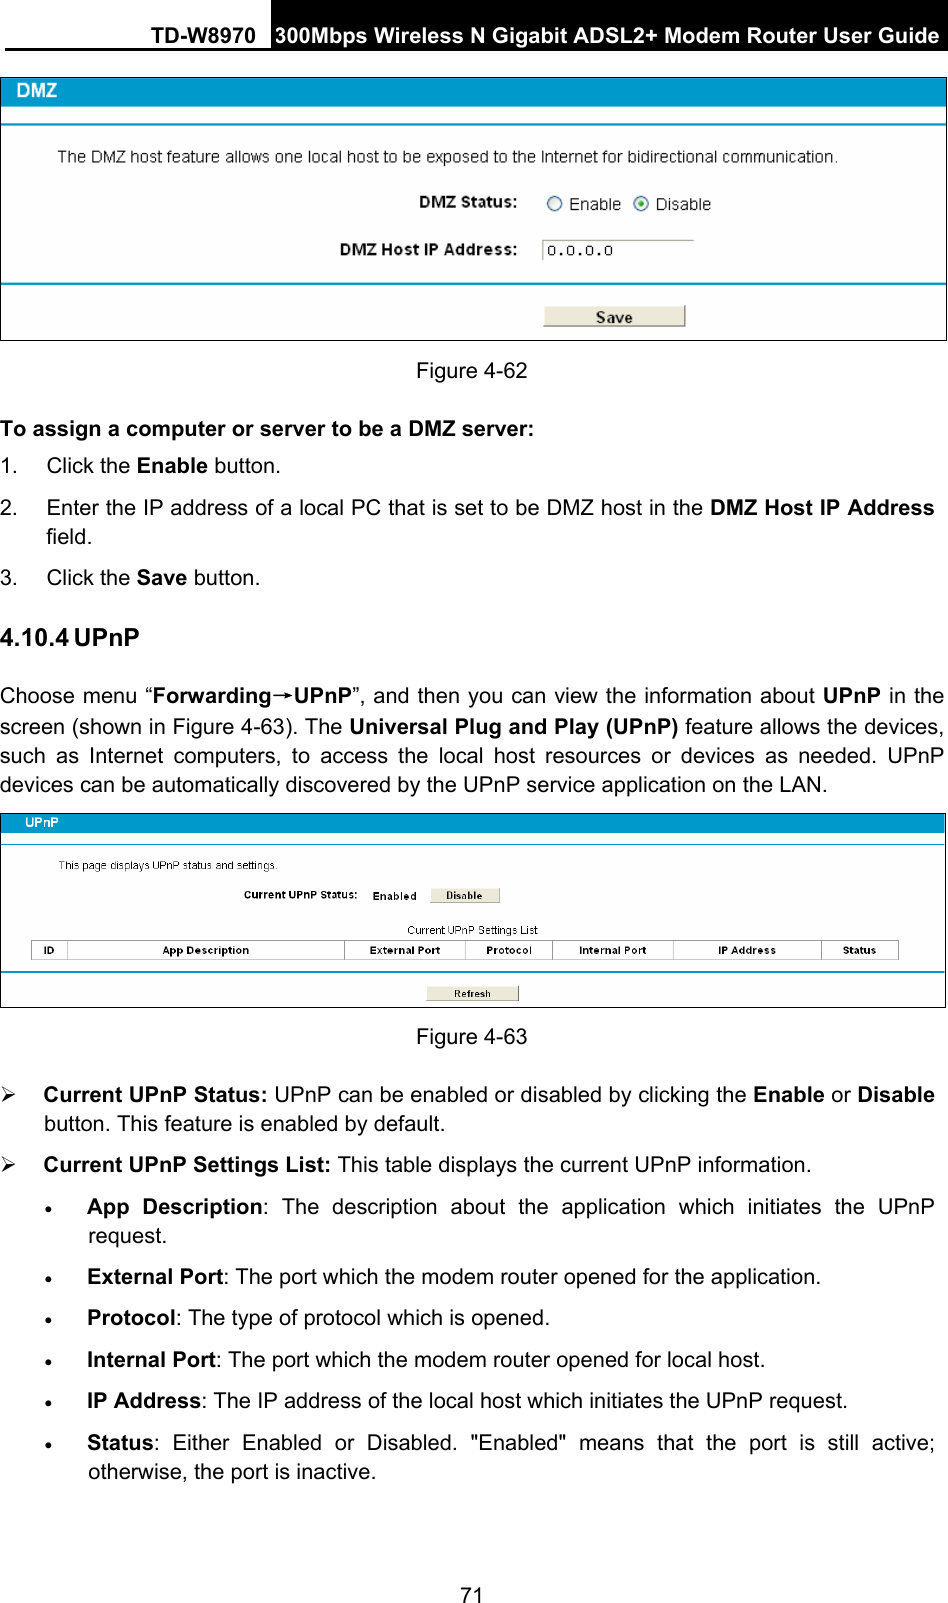 TD-W8970 300Mbps Wireless N Gigabit ADSL2+ Modem Router User Guide 71  Figure 4-62 To assign a computer or server to be a DMZ server:   1. Click the Enable button.   2.  Enter the IP address of a local PC that is set to be DMZ host in the DMZ Host IP Address field.  3. Click the Save button.   4.10.4 UPnP Choose menu “Forwarding→UPnP”, and then you can view the information about UPnP in the screen (shown in Figure 4-63). The Universal Plug and Play (UPnP) feature allows the devices, such as Internet computers, to access the local host resources or devices as needed. UPnP devices can be automatically discovered by the UPnP service application on the LAN.  Figure 4-63 ¾ Current UPnP Status: UPnP can be enabled or disabled by clicking the Enable or Disable button. This feature is enabled by default. ¾ Current UPnP Settings List: This table displays the current UPnP information. • App Description: The description about the application which initiates the UPnP request.  • External Port: The port which the modem router opened for the application.   • Protocol: The type of protocol which is opened.   • Internal Port: The port which the modem router opened for local host.   • IP Address: The IP address of the local host which initiates the UPnP request.   • Status: Either Enabled or Disabled. &quot;Enabled&quot; means that the port is still active; otherwise, the port is inactive.   